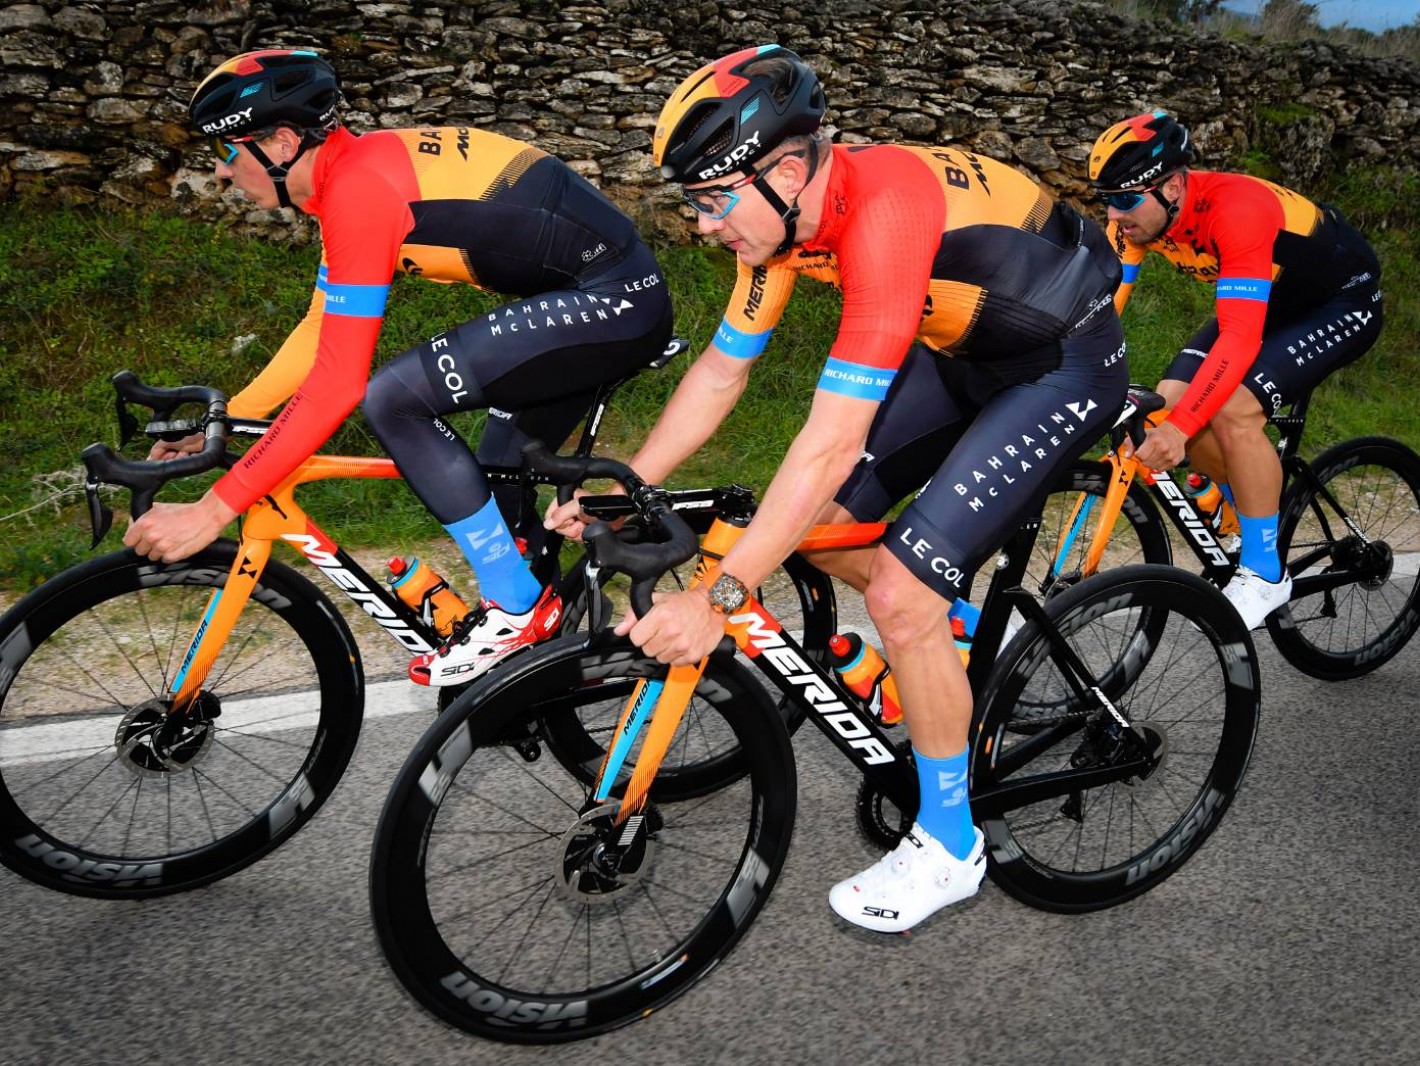 The team sponsored by Merida--Team Bahrain McLaren will participate in the World Tour Pro Teams road bike race this year with three models of Merida's racing bikes: SCULTURA, REACTO and TIME WARP TT.